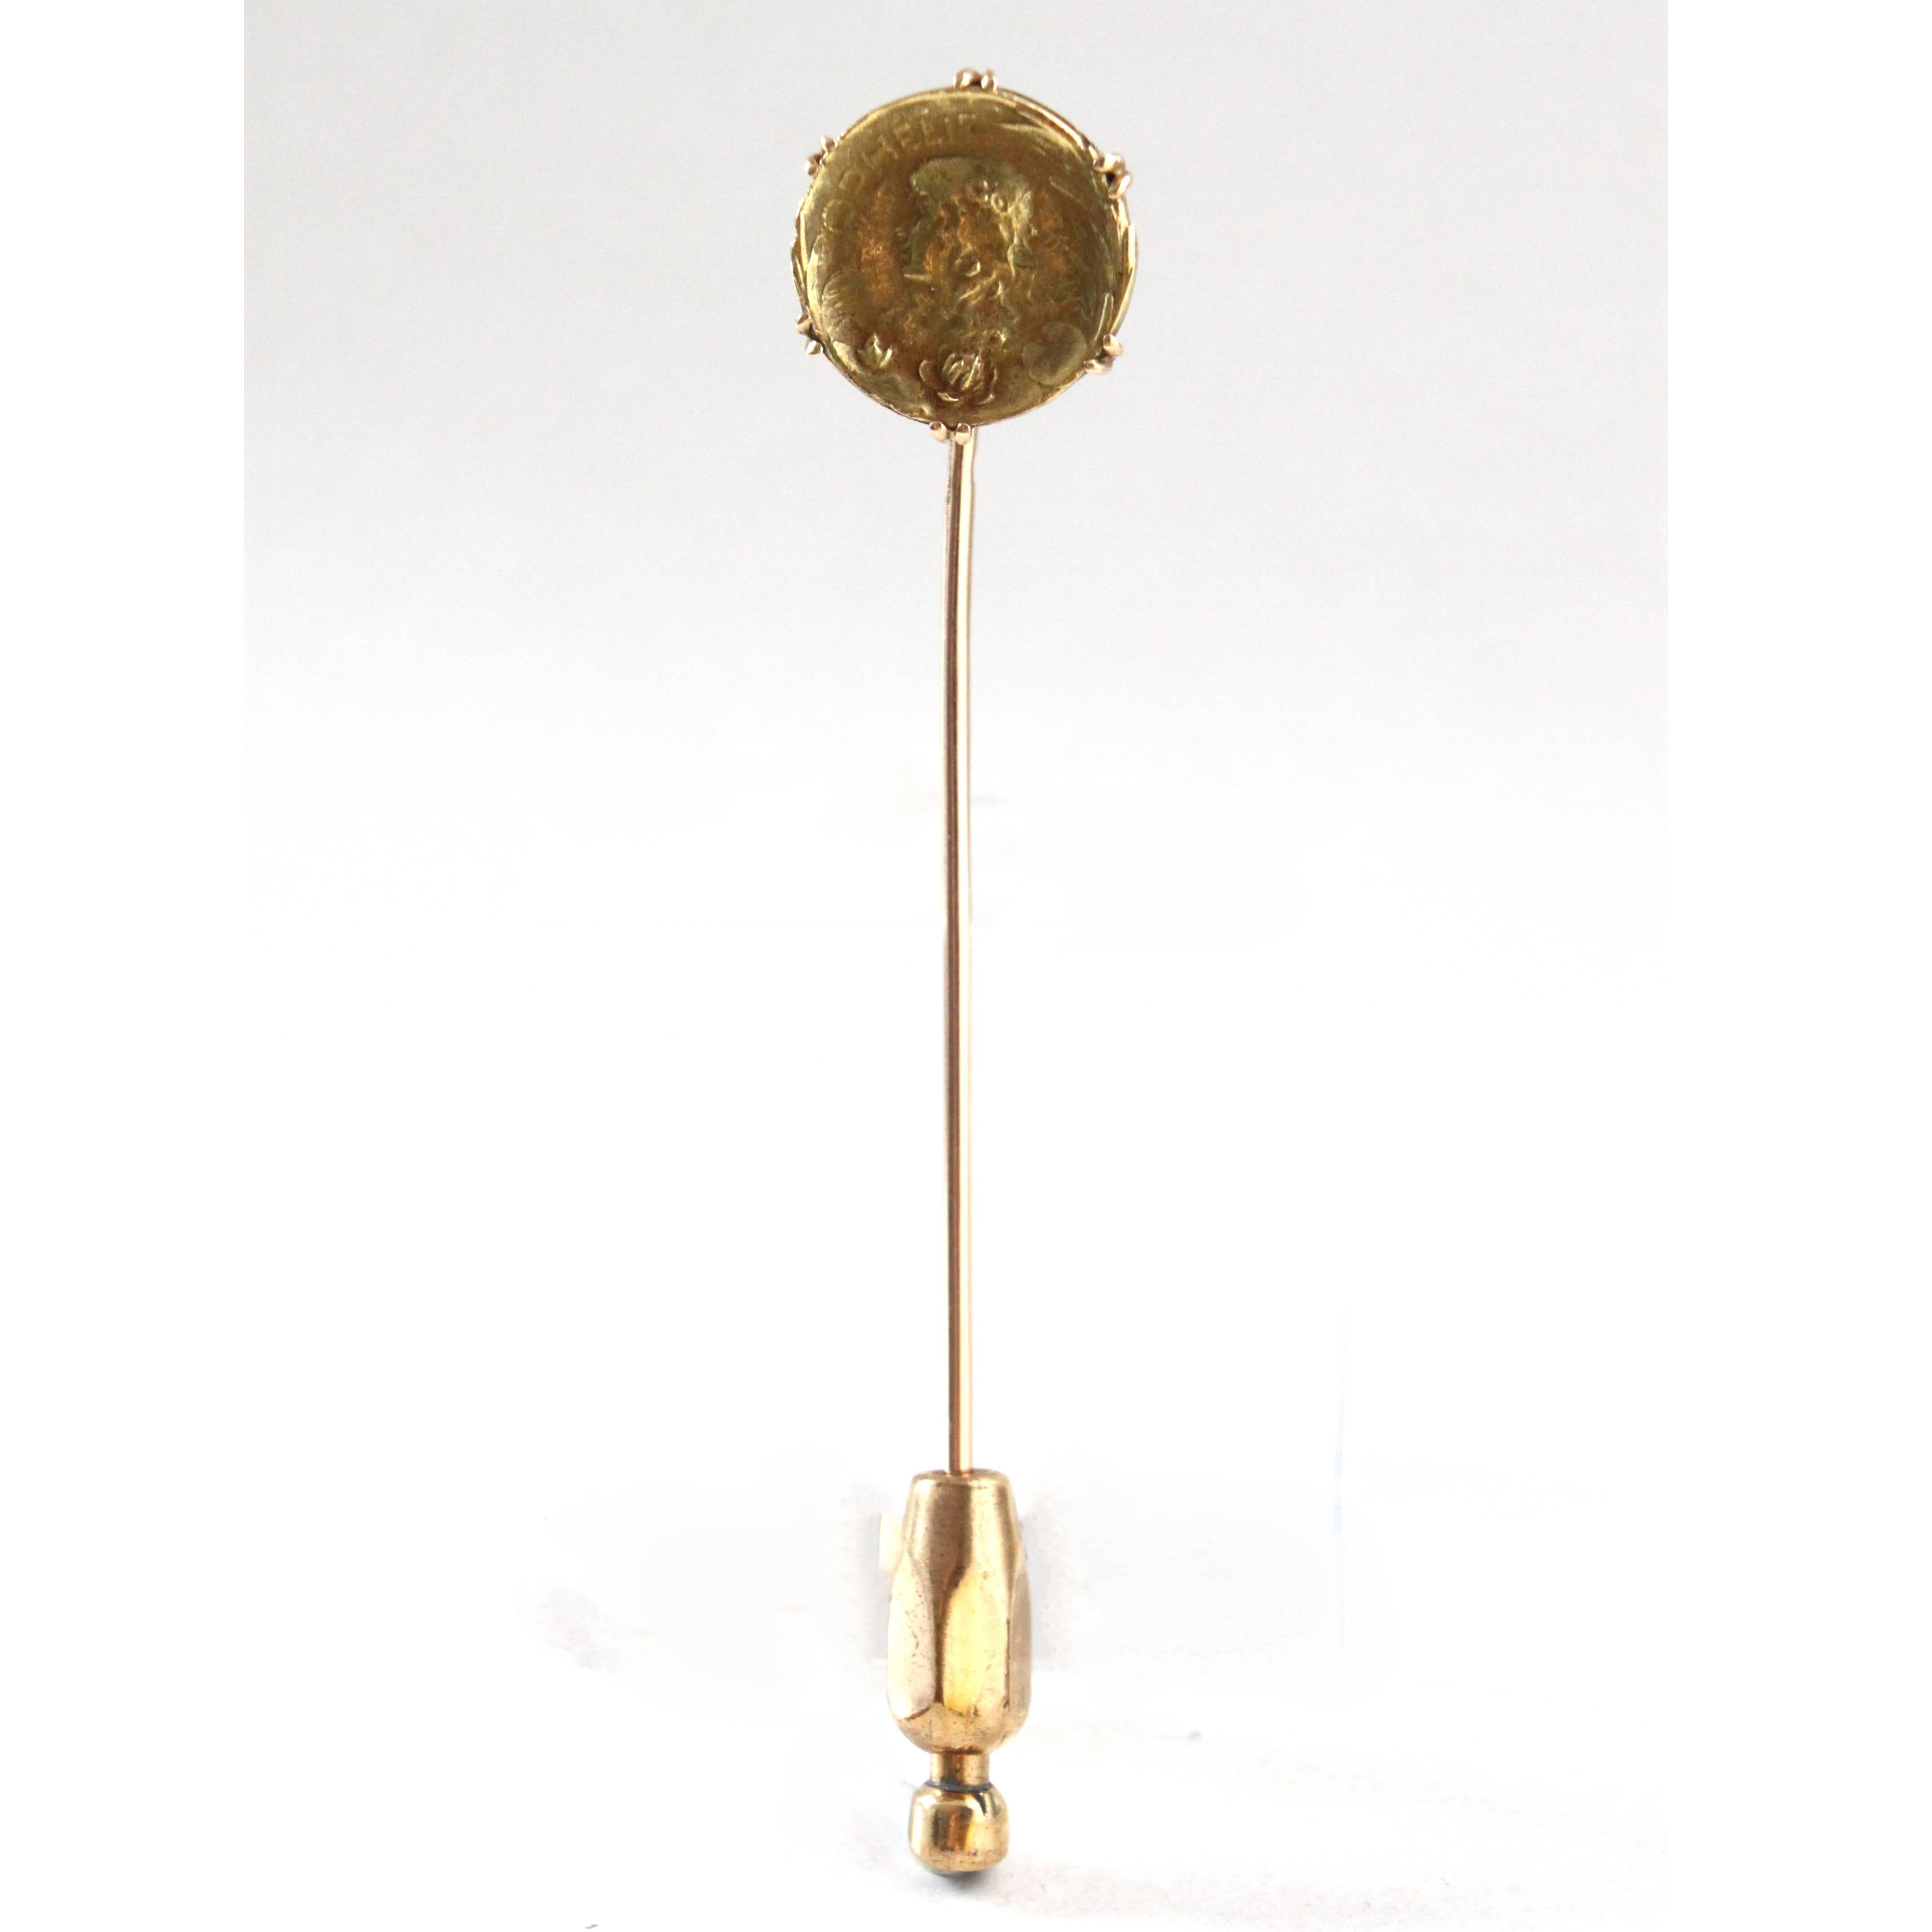 French Art Nouveau Stick Pin, ca. 1910s.

The pin is based on a gold coin depicting William Shakespeare's Hamlet figure 